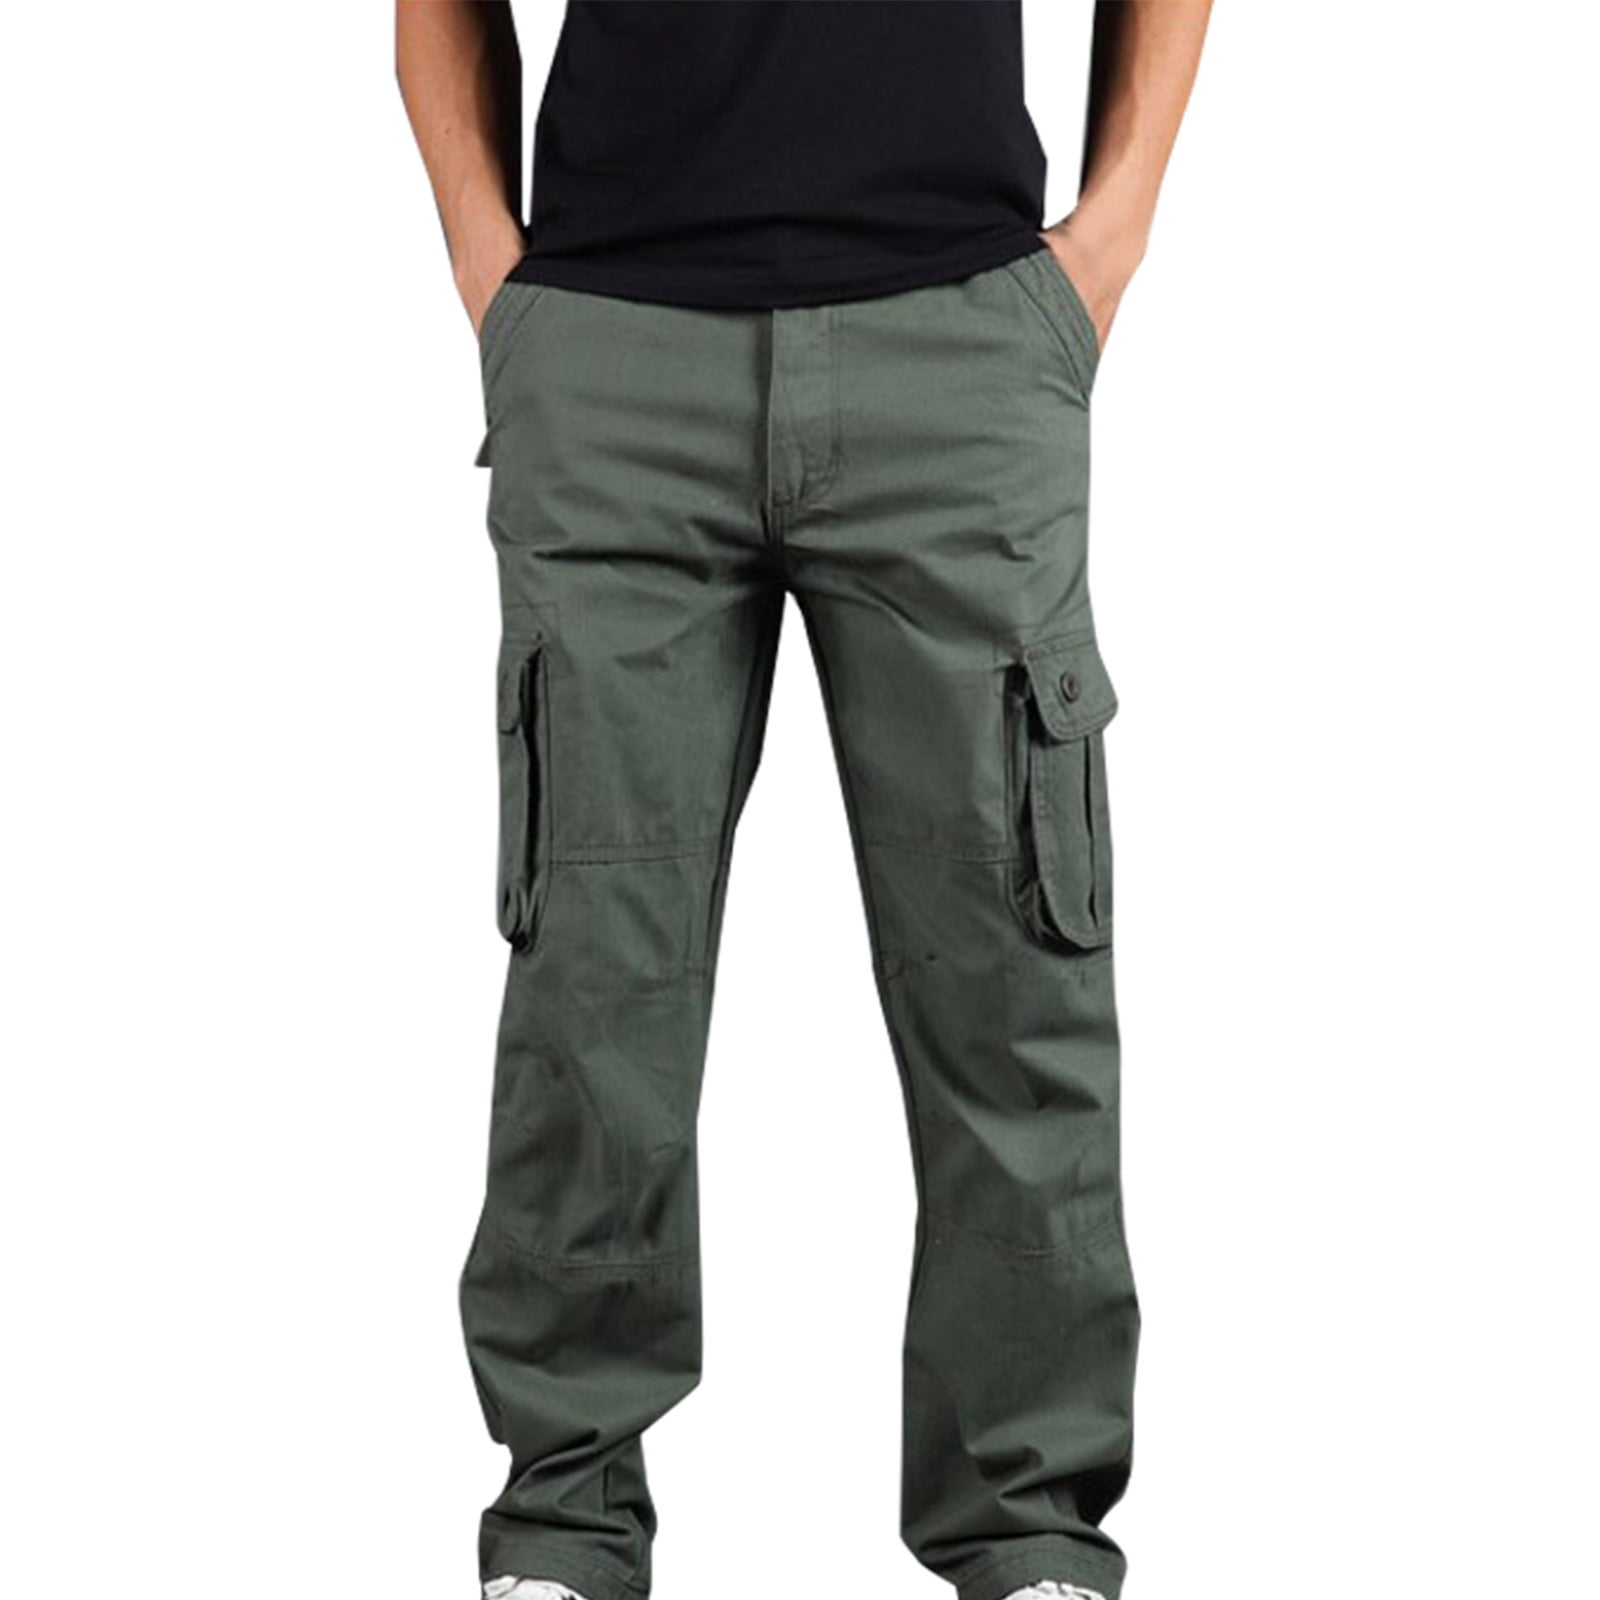 Men's Outdoor Pants - All in Motion Green XL 1 ct